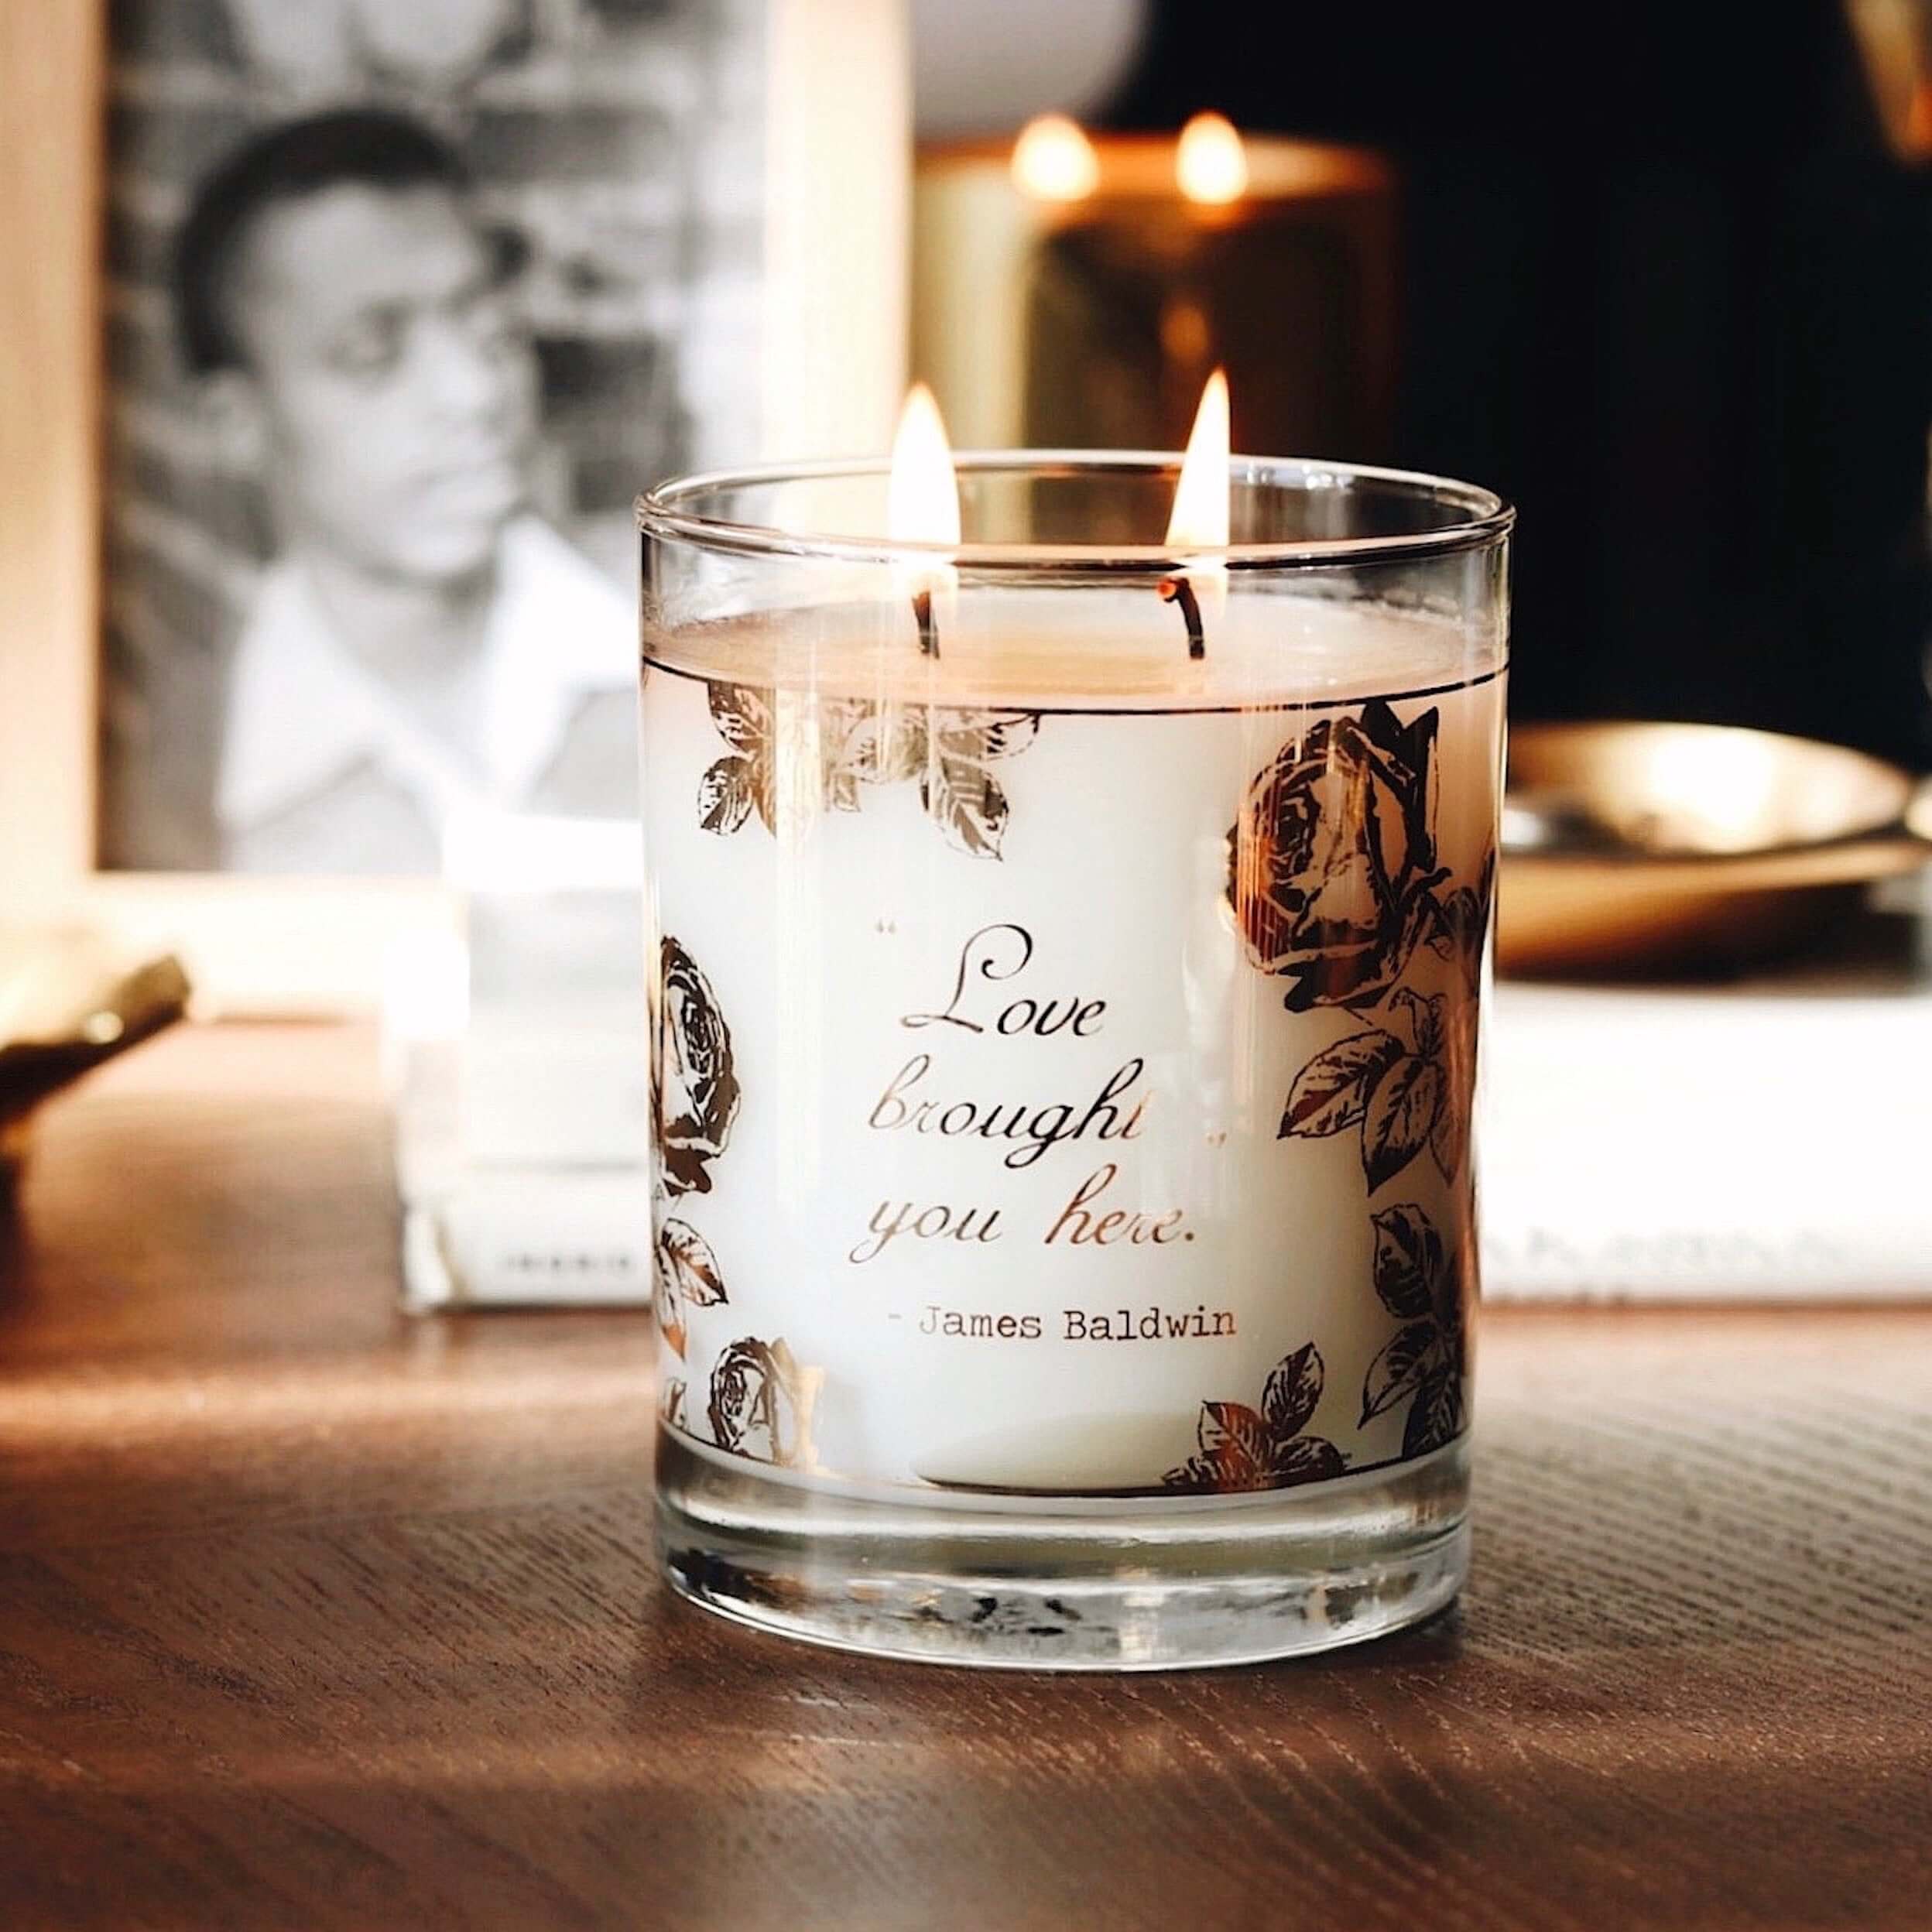 A lifestyle image of our 22k Gold James Baldwin "Love" candle, lit, on a wooden table in front of a black and white photo of James Baldwin in a gold frame.